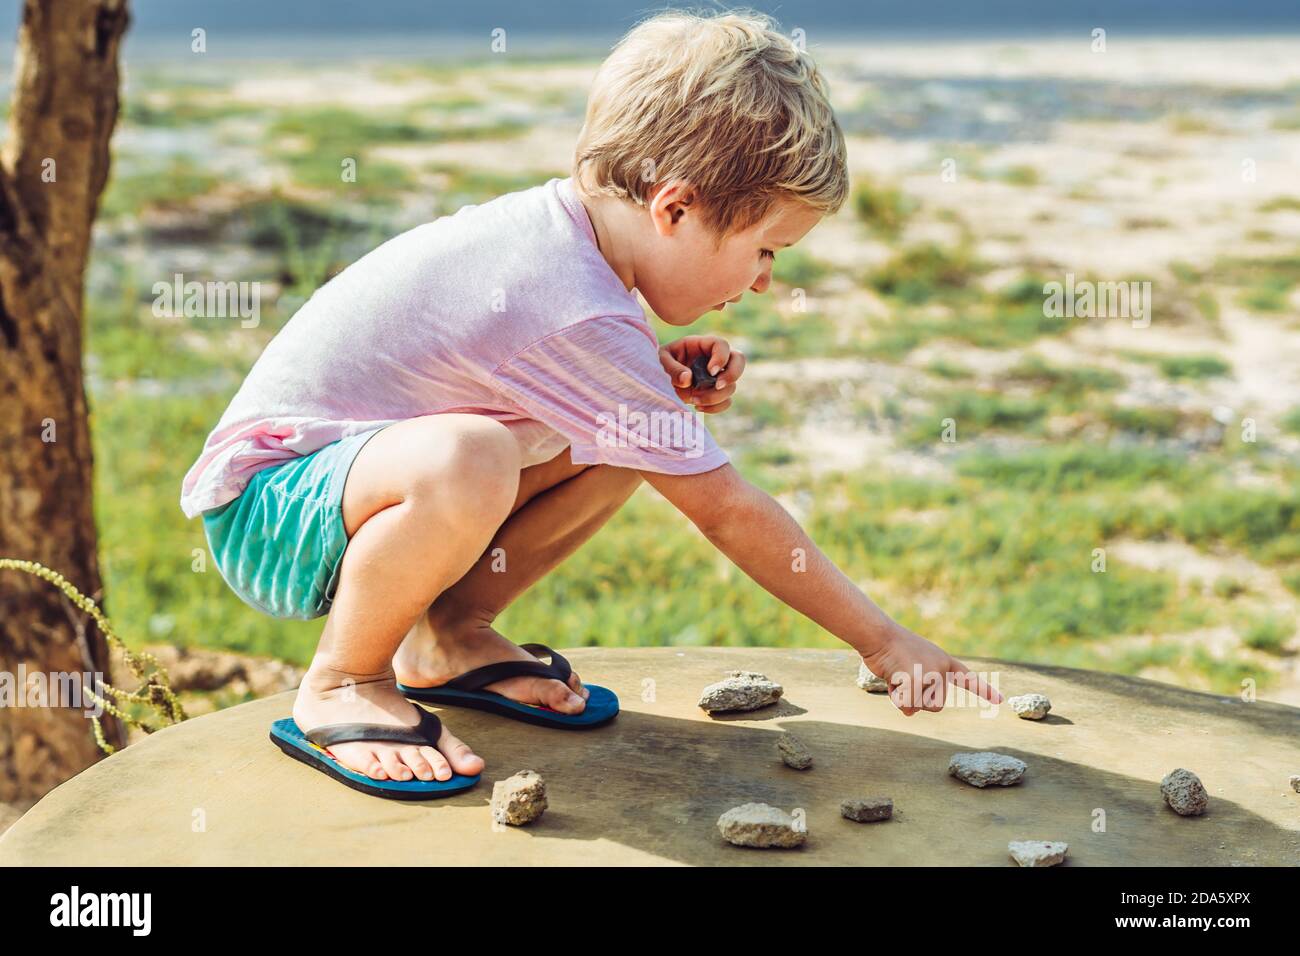 Cute Child freckled face boy play squatting outside nature sun day, driving traffic regulation rules use stone imitation cars toy. Expressive Serious Stock Photo